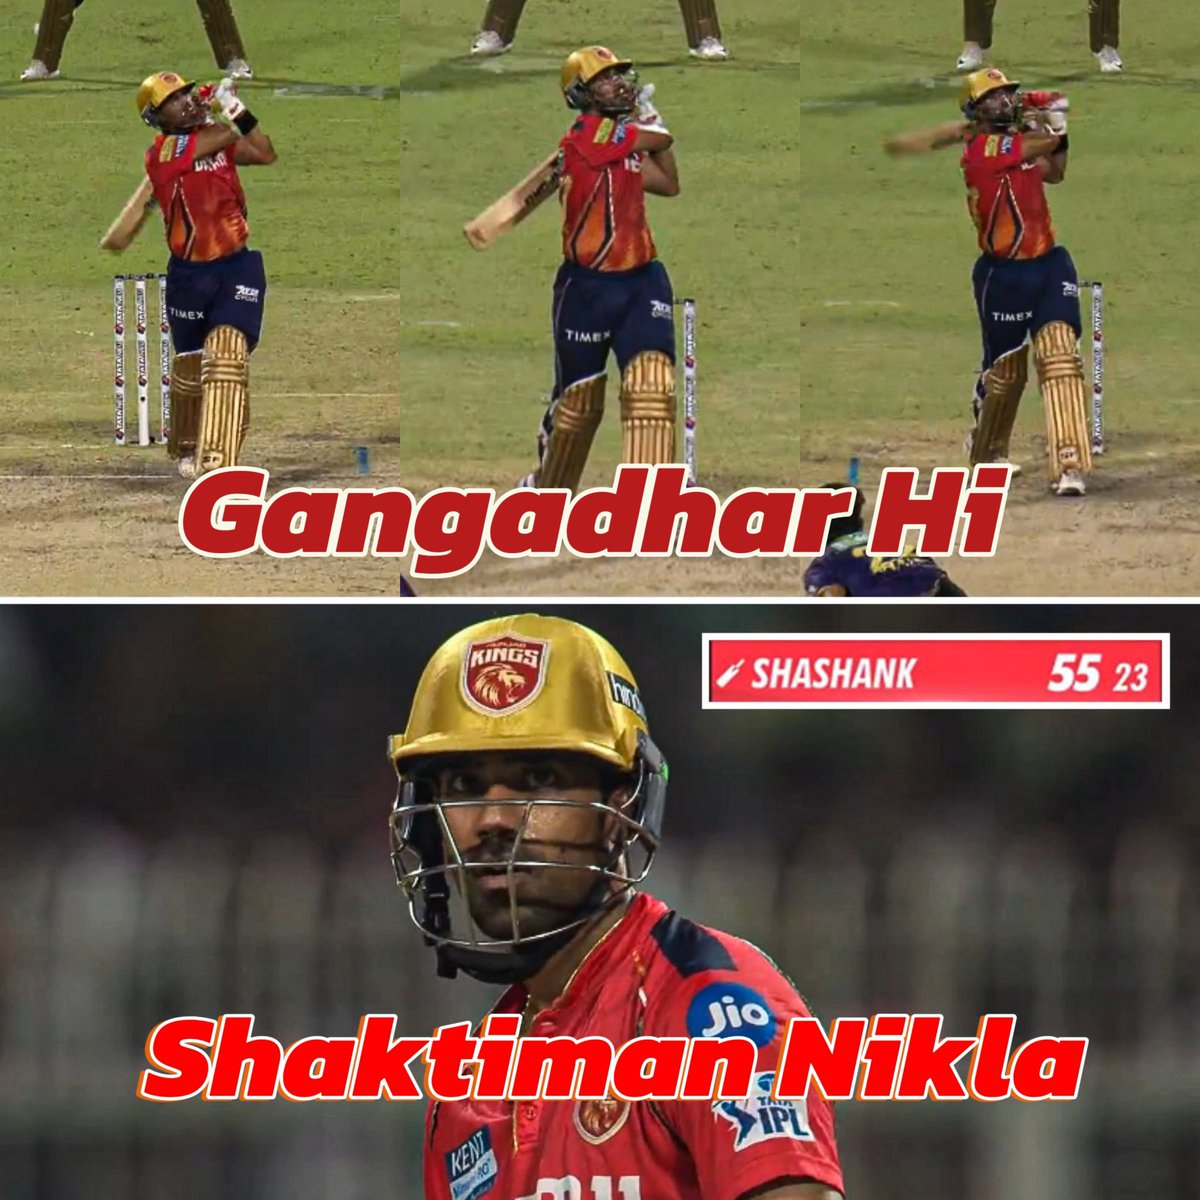 What a Match SHASHANK SINGH, THE FINISHER. 🫡 - The consistency of an Indian uncapped player is remarkable. #KKRvsPBKS #winmetawin️ Punjab Kings Preity Zinta Gambhir Chase Bowlers KKHaar